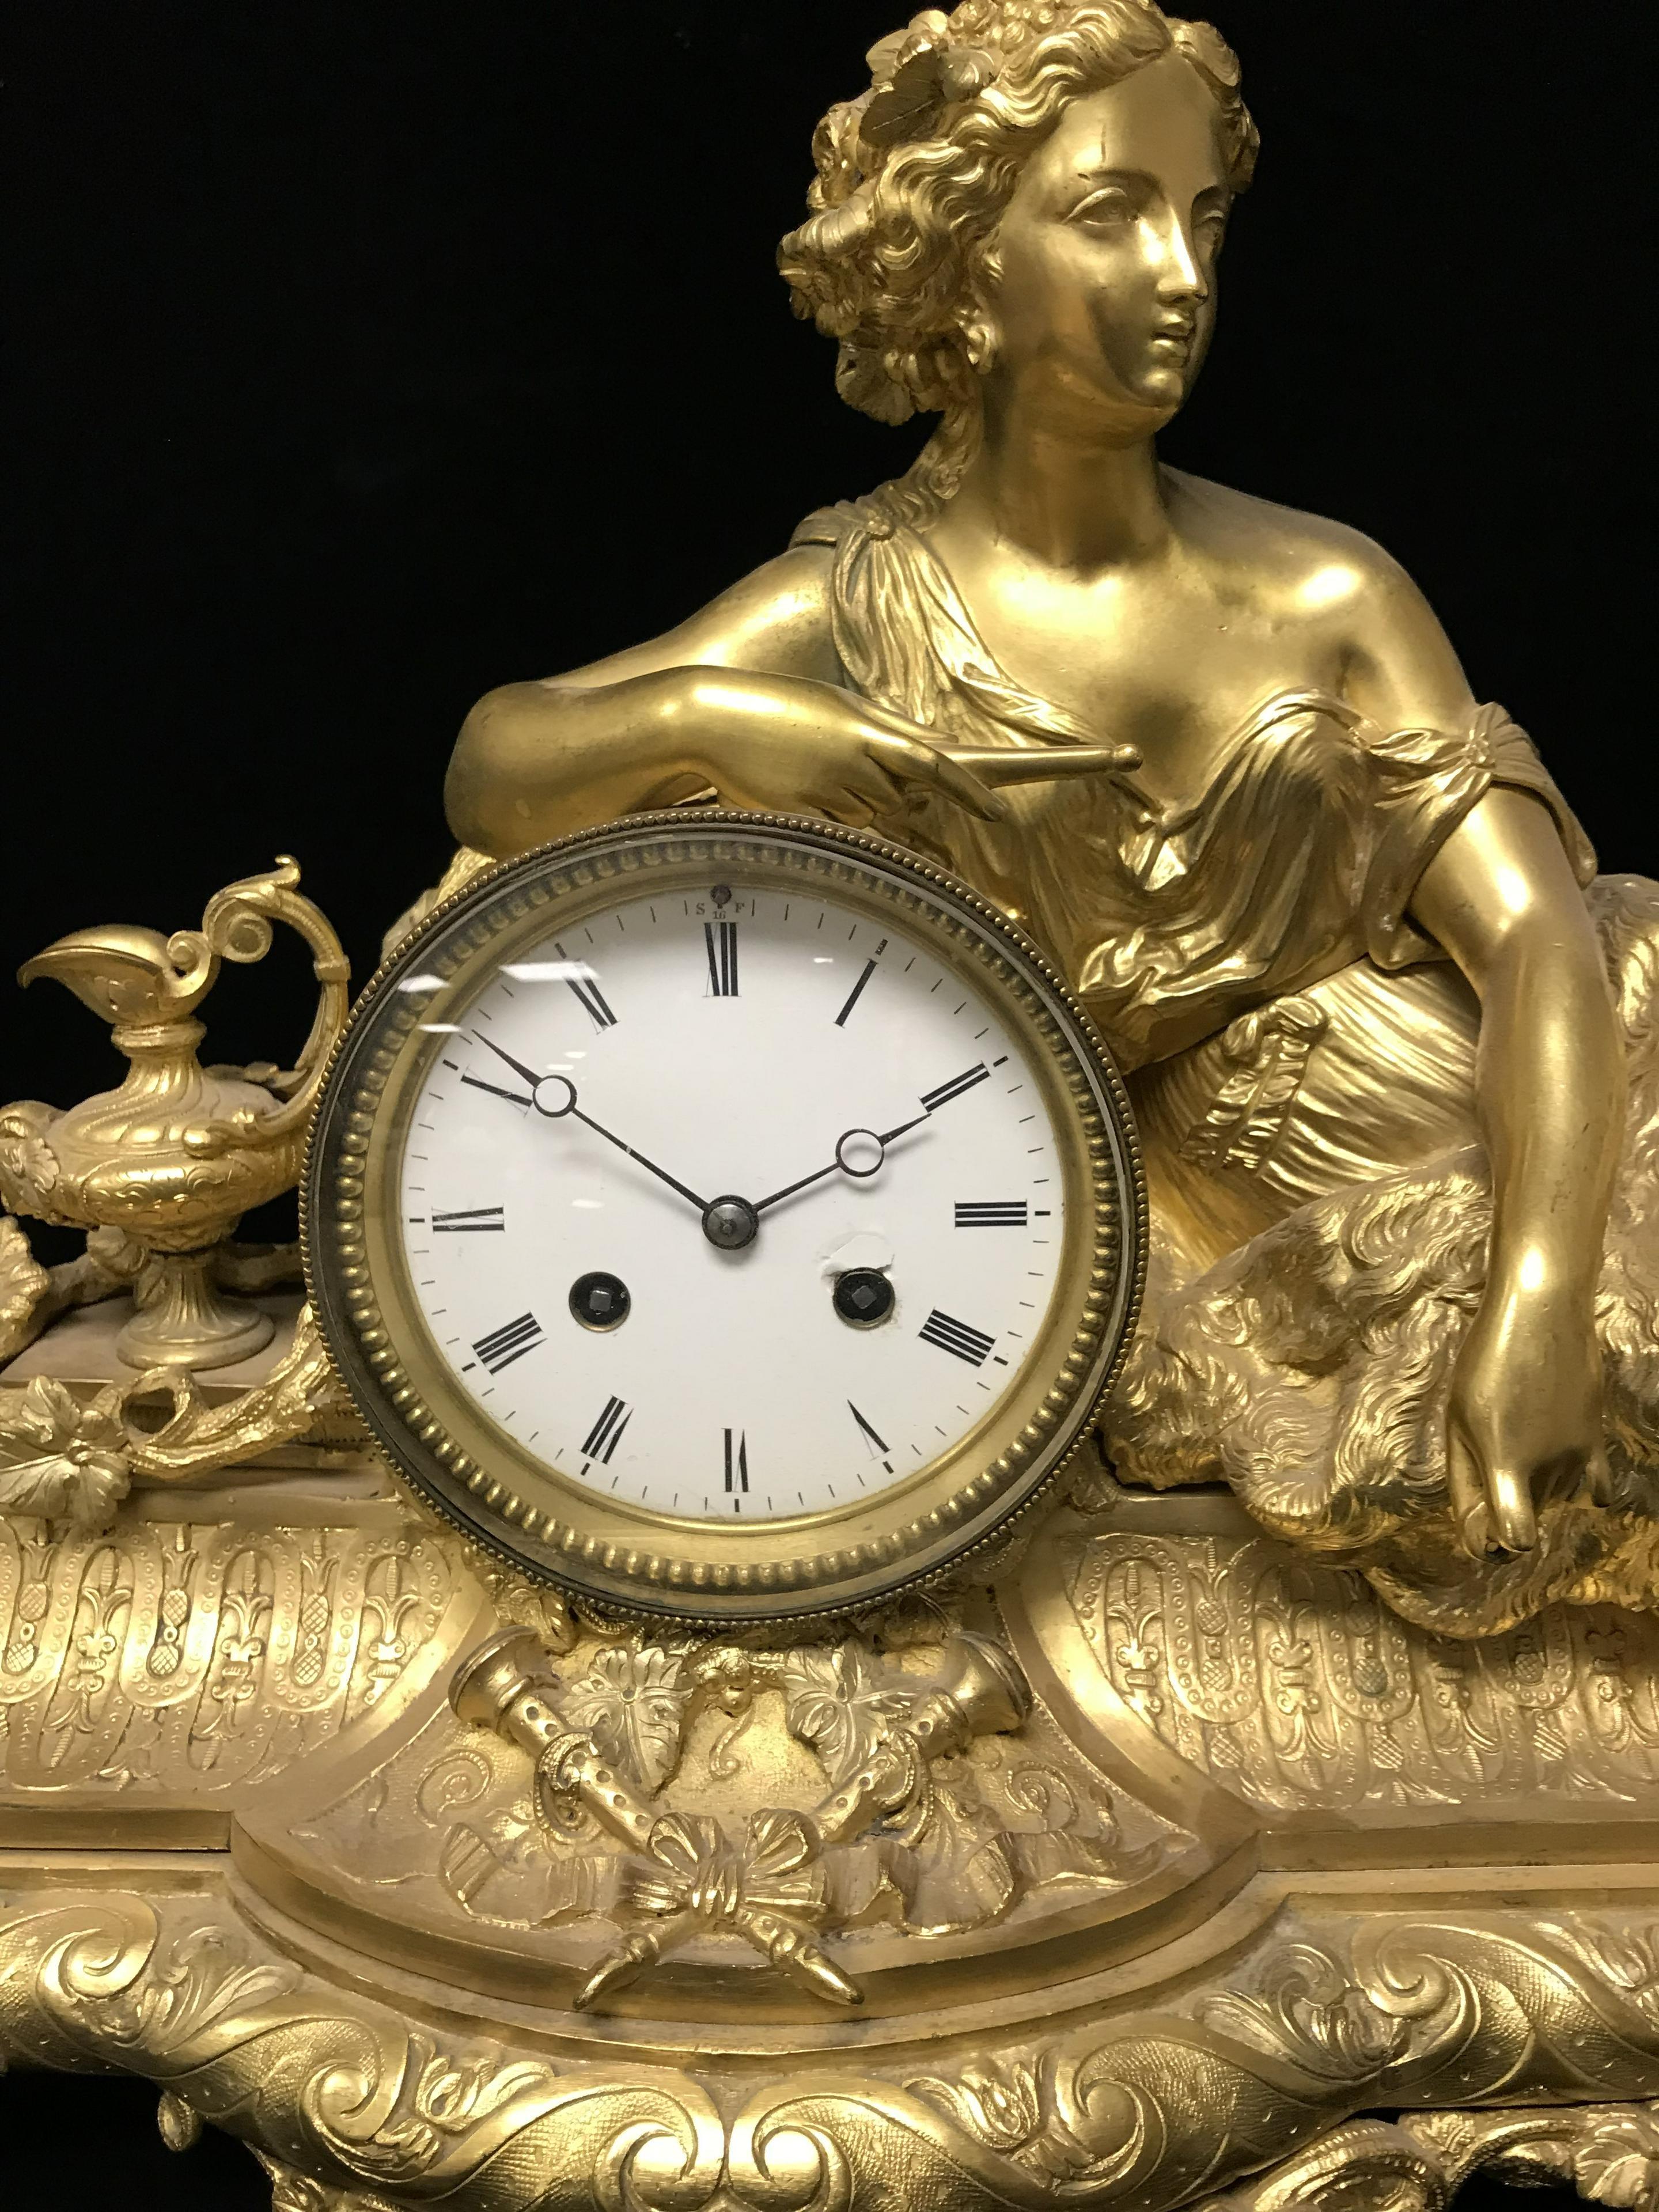 Antique Gilt Bronze French Mantle Clock - Gold Figurative Sculpture by Unknown